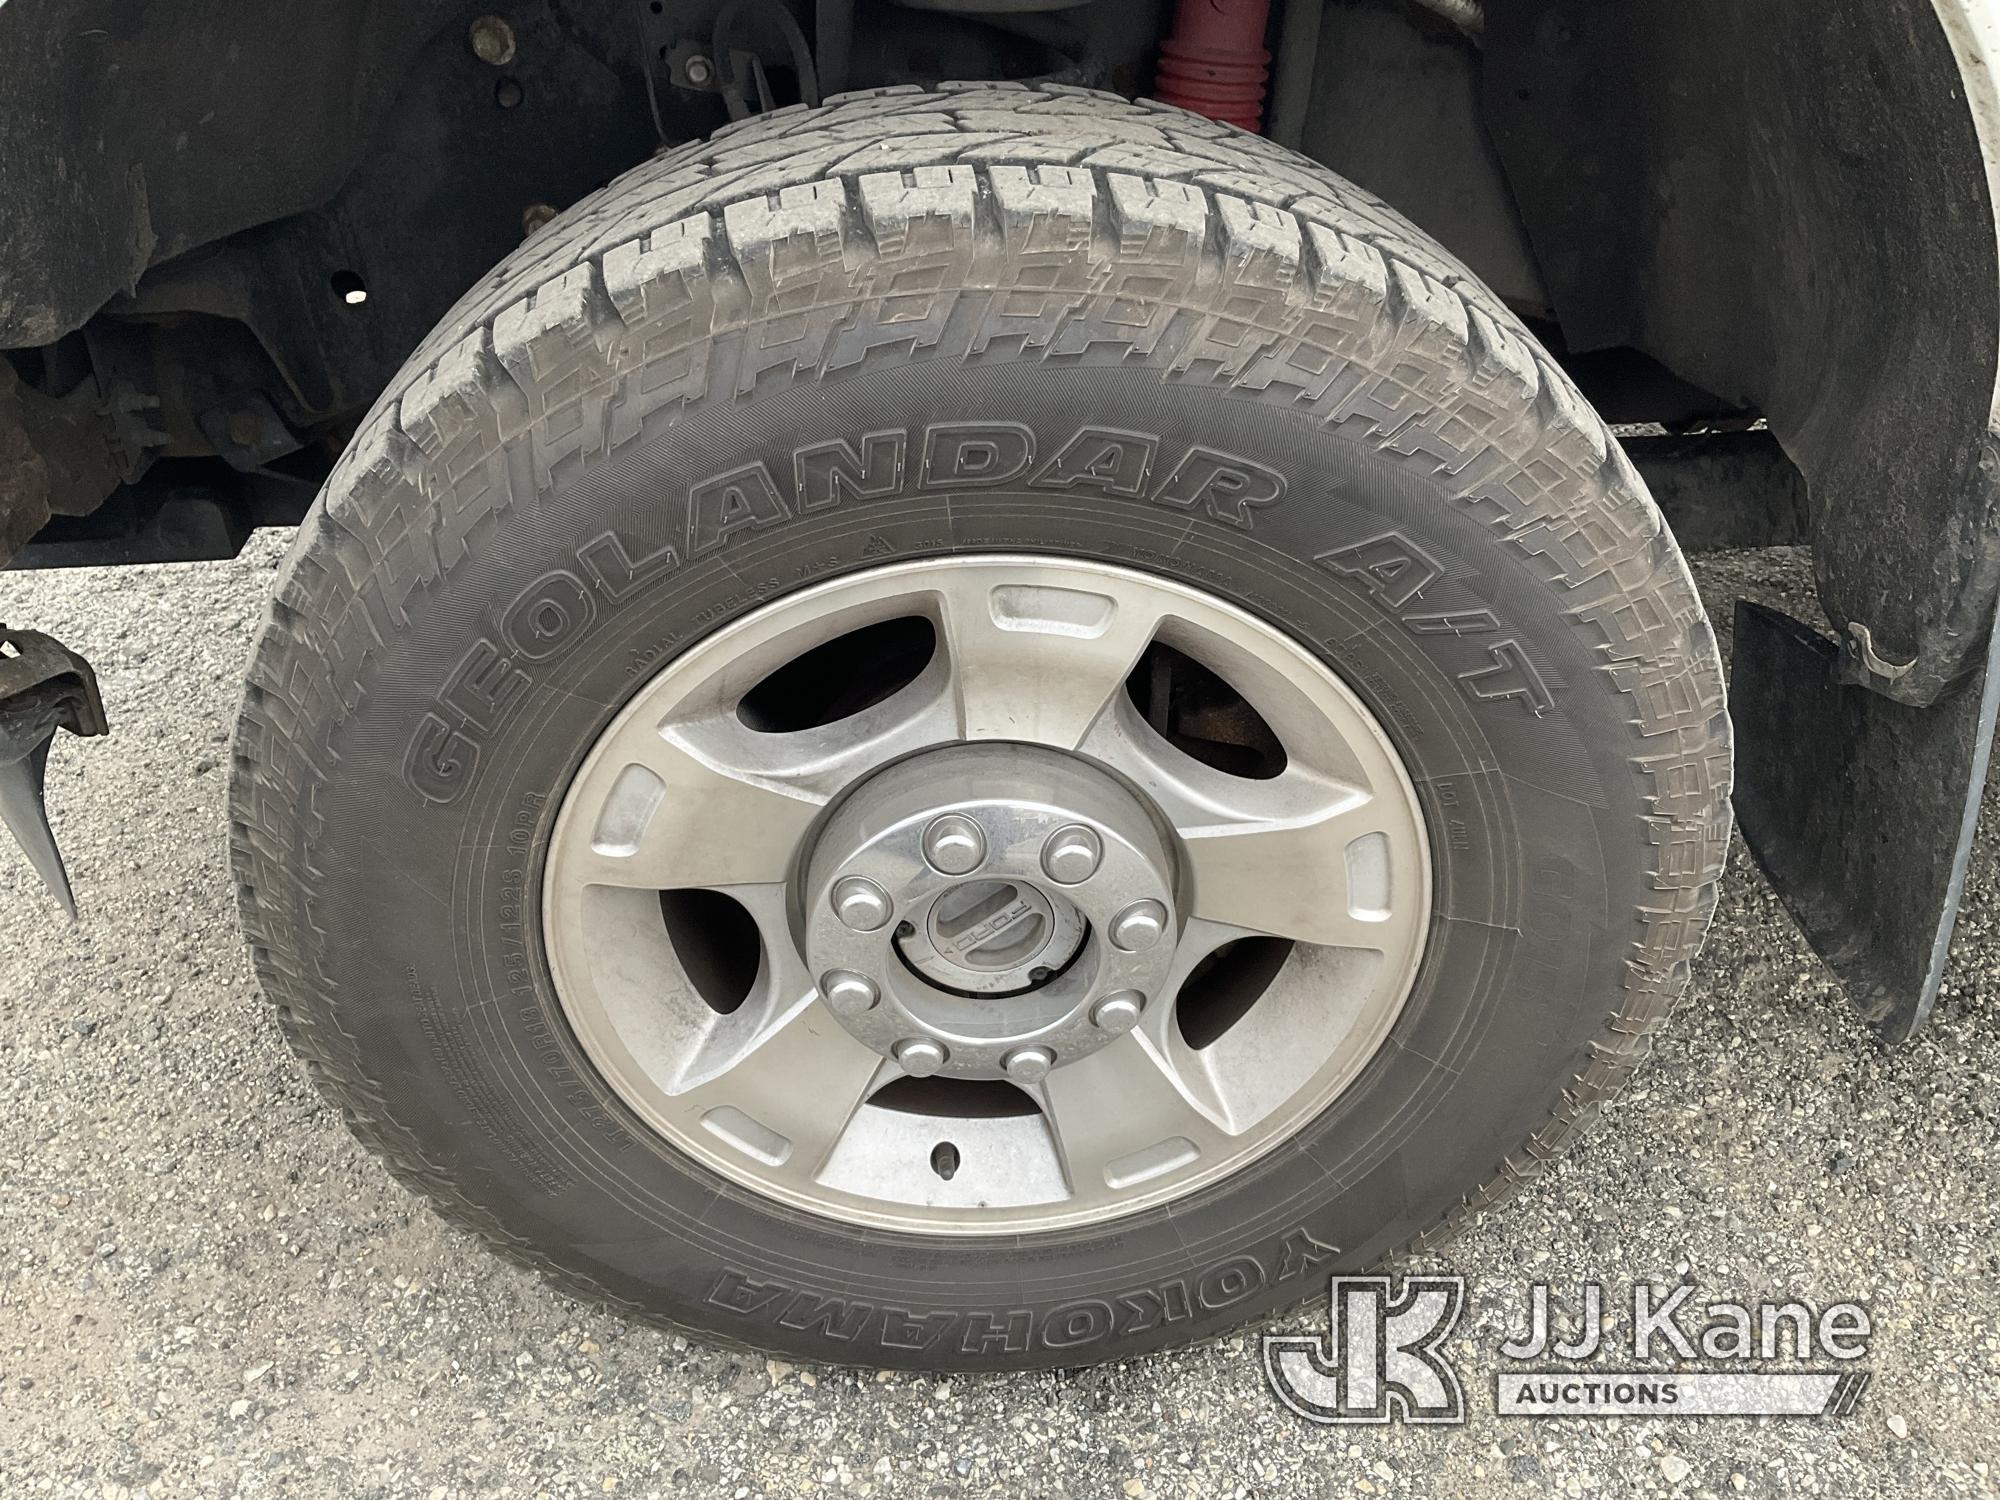 (Plymouth Meeting, PA) 2015 Ford F350 4x4 Extended-Cab Pickup Truck Runs & Moves, Body & Rust Damage